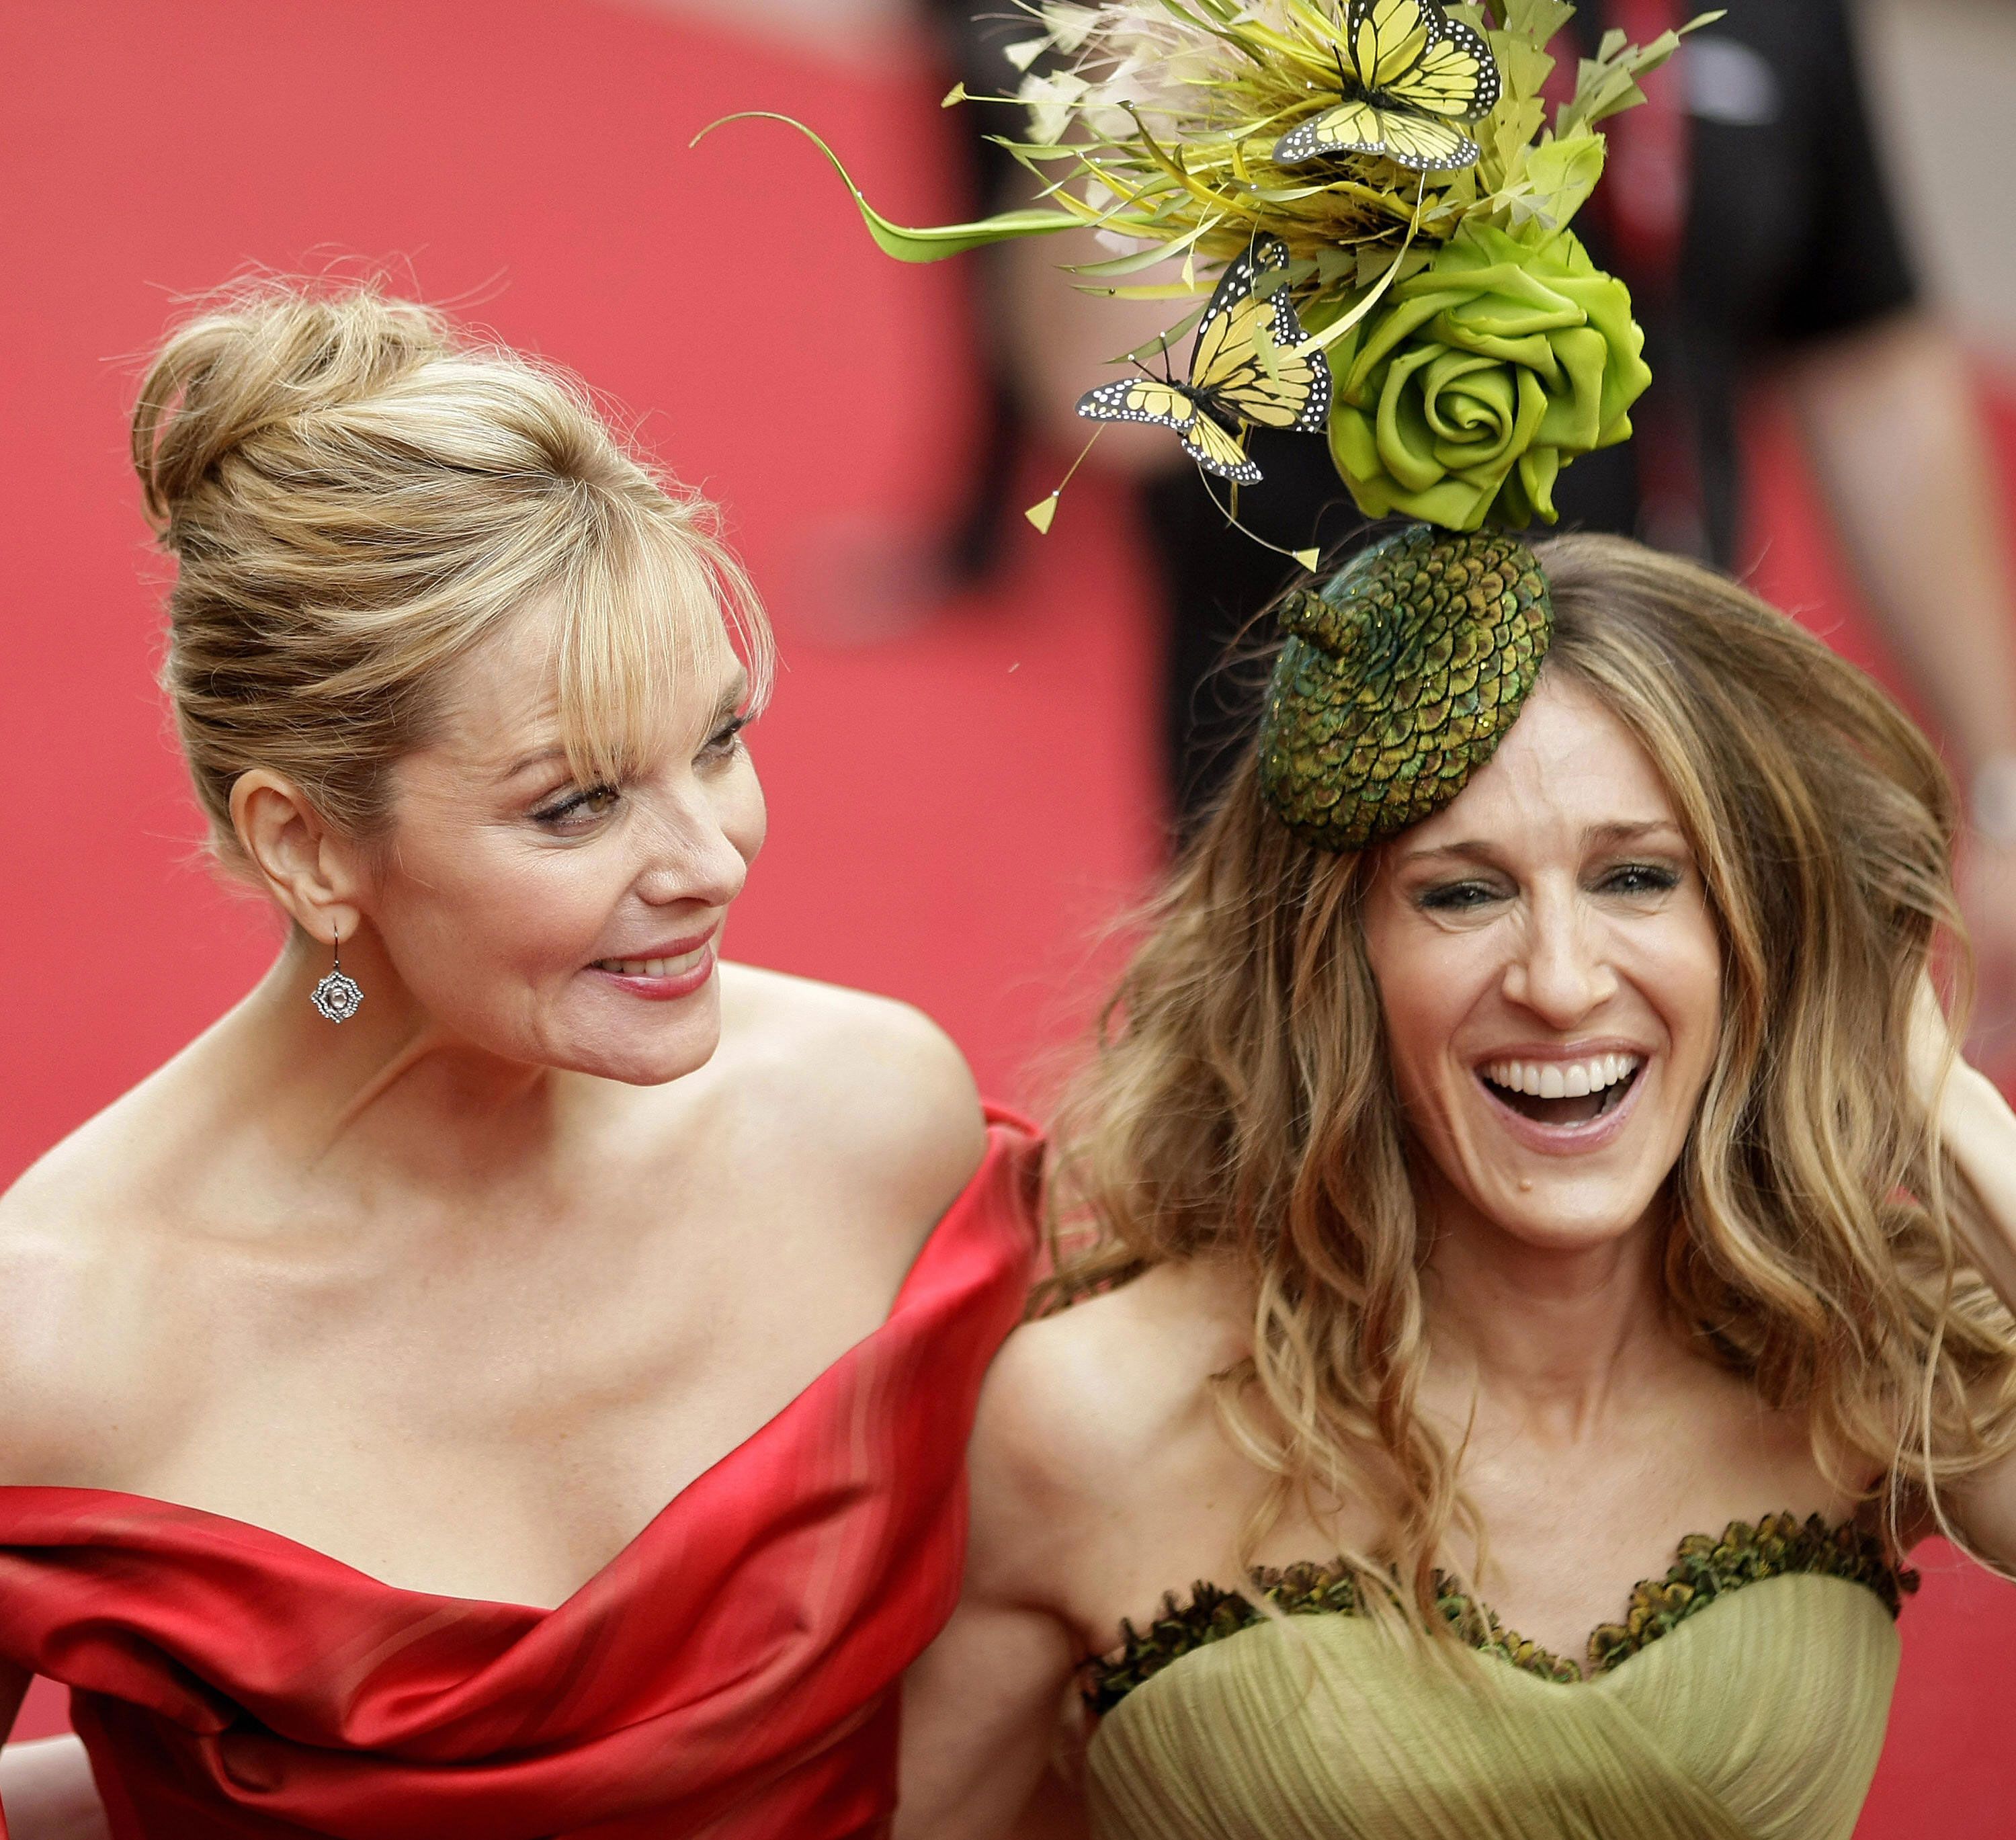 Sarah Jessica Parker is revealed as the designer behind many of